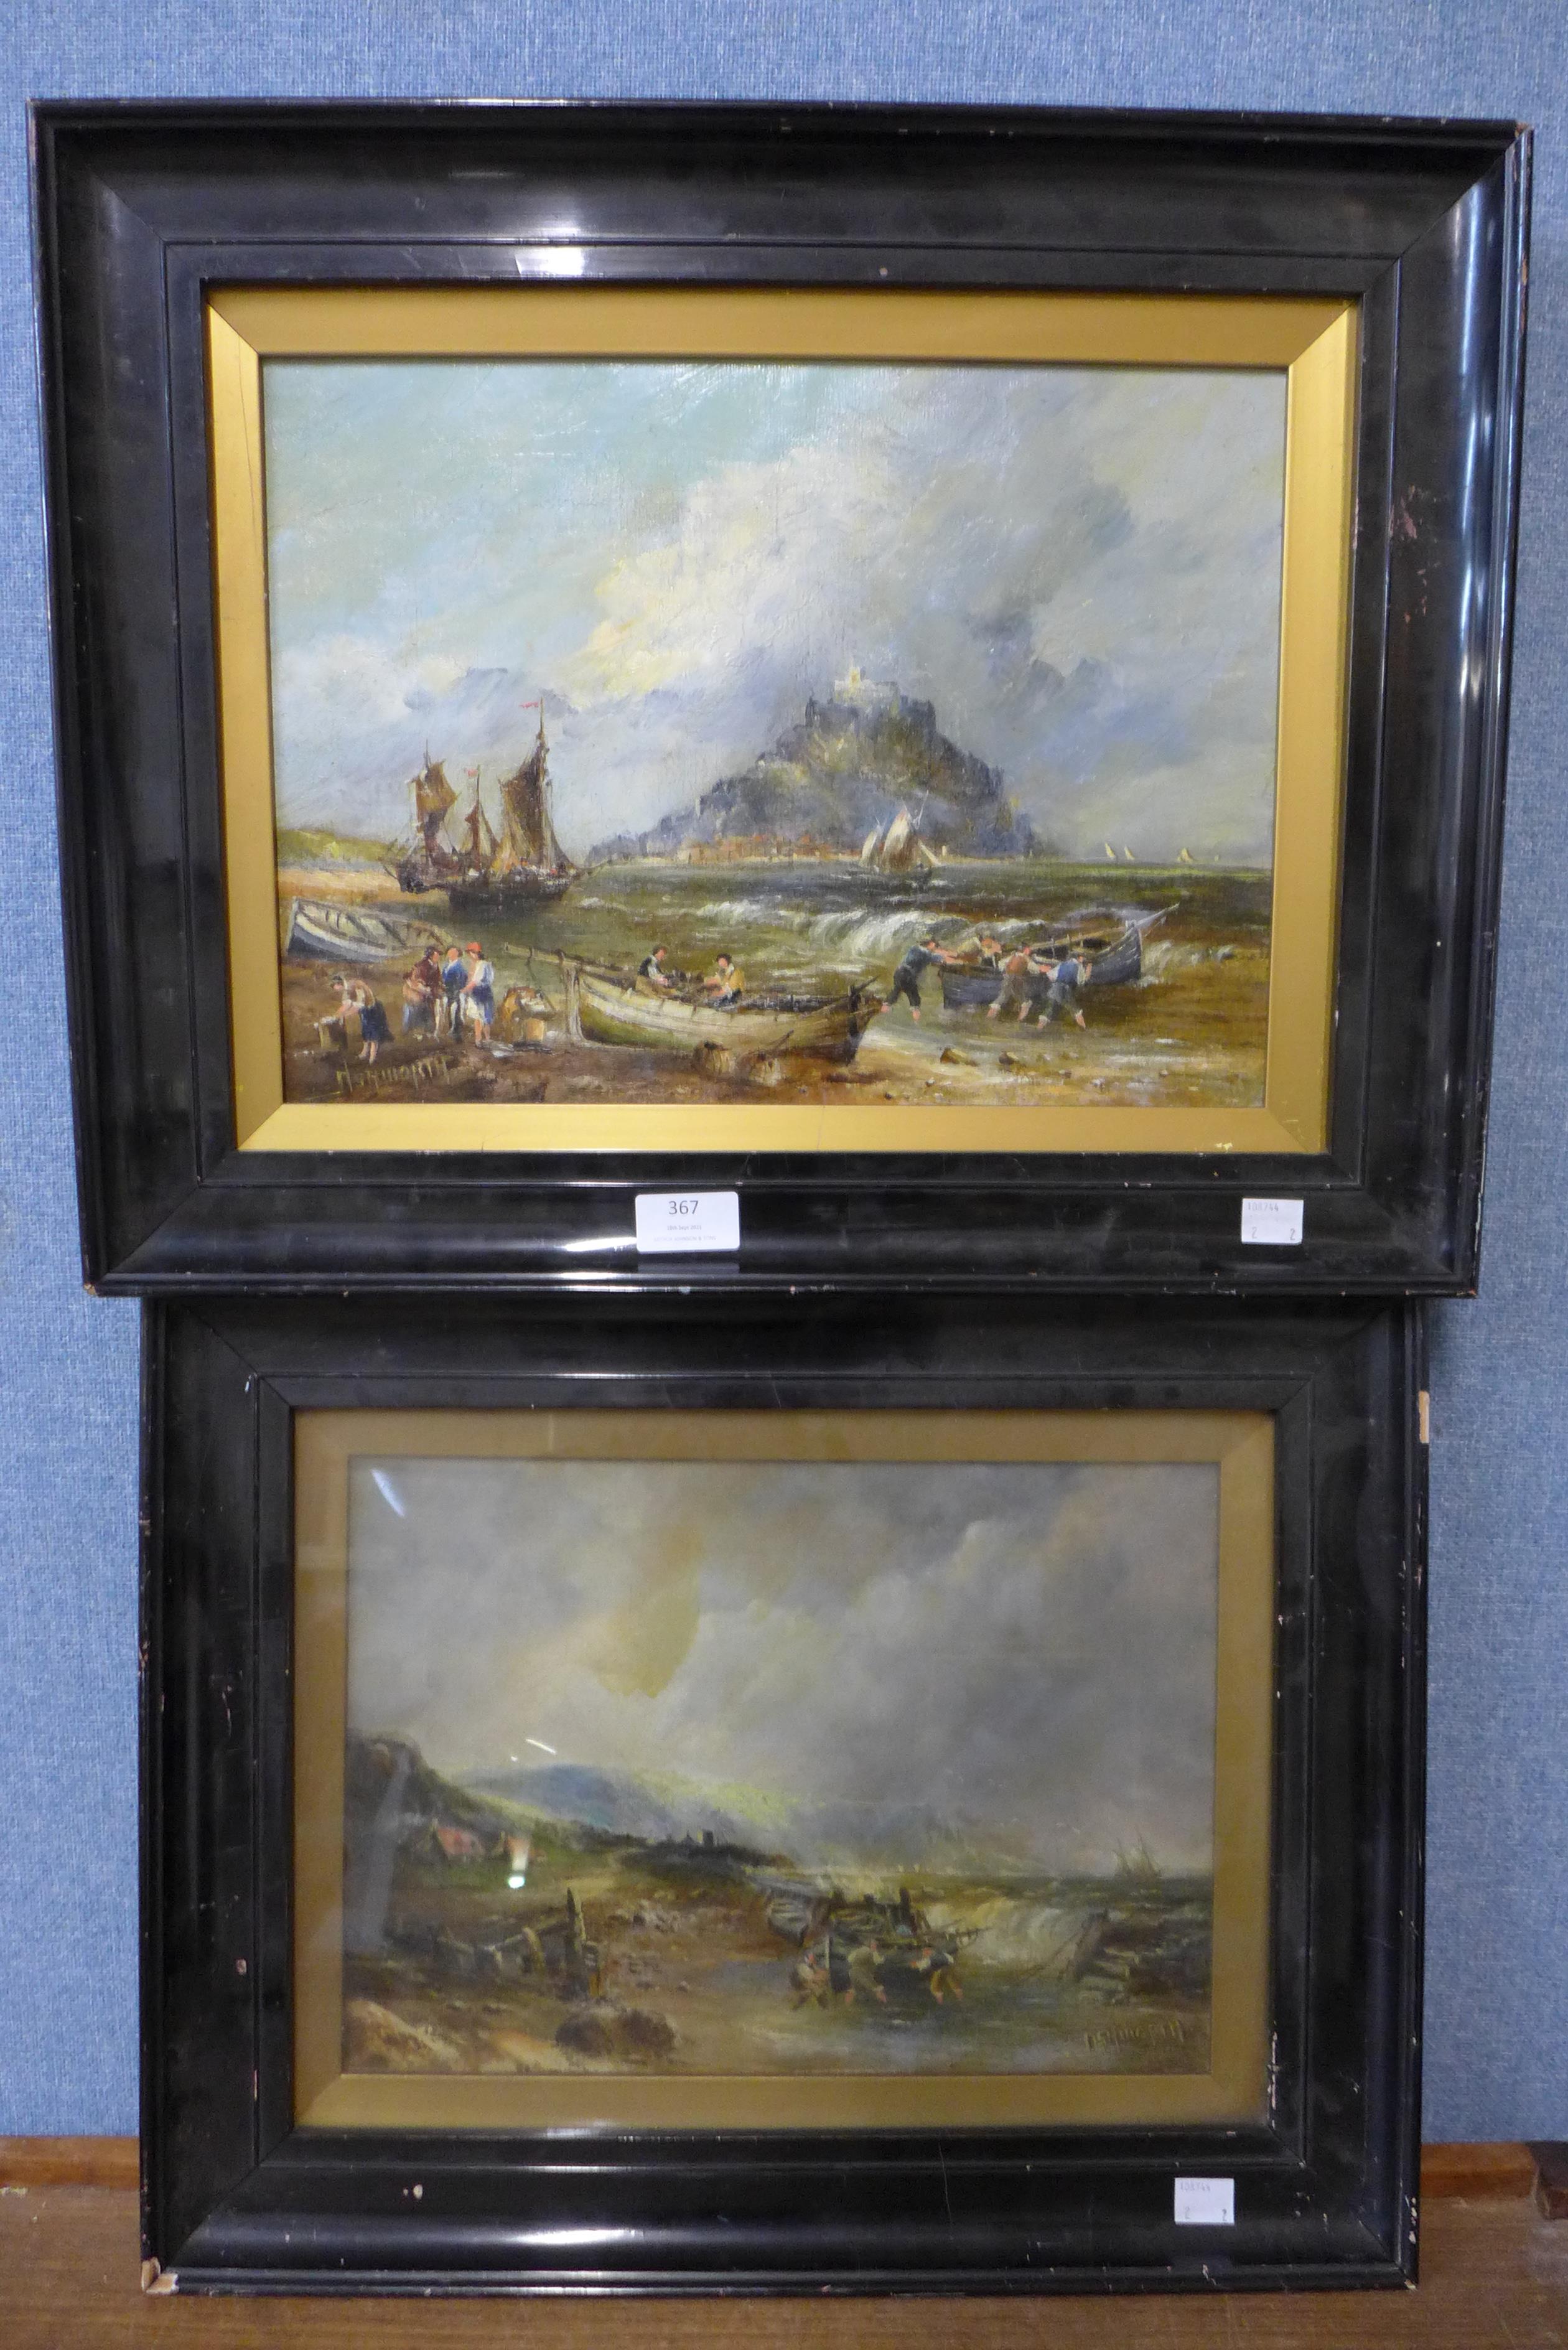 * Ashworth, pair of Cornish landscapes, oil on canvas, 27 x 37cms, framed